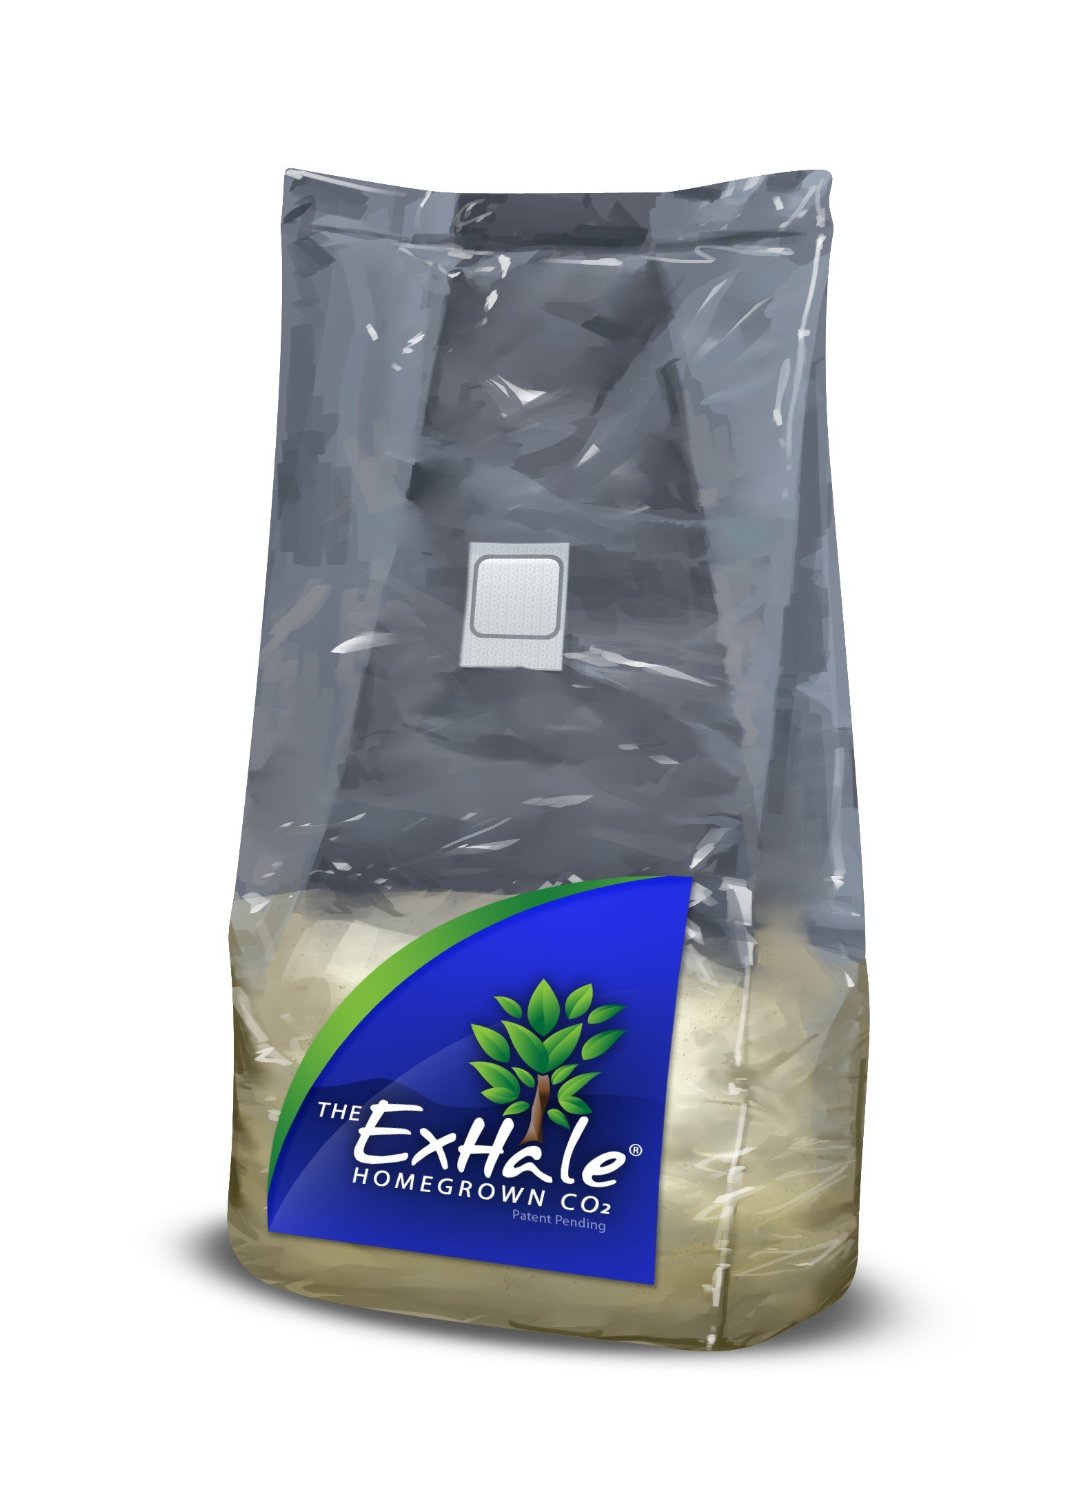 THE EXHALE HOMEGROWN CO2 BAG (SMALL)